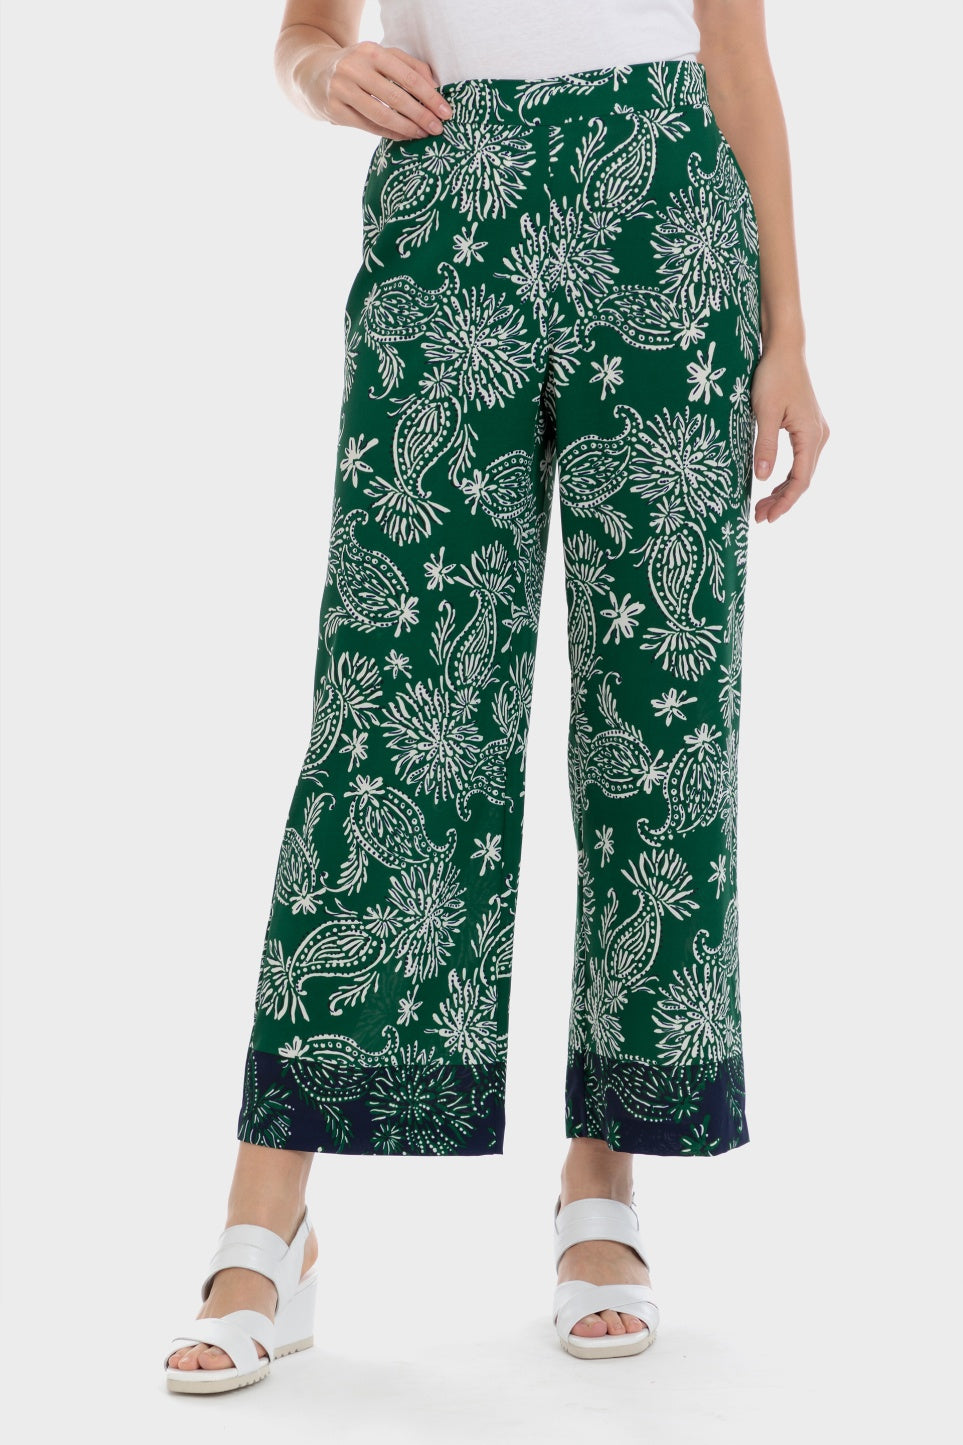 Punt Roma Cashmere Print Trousers - Green 1 Shaws Department Stores